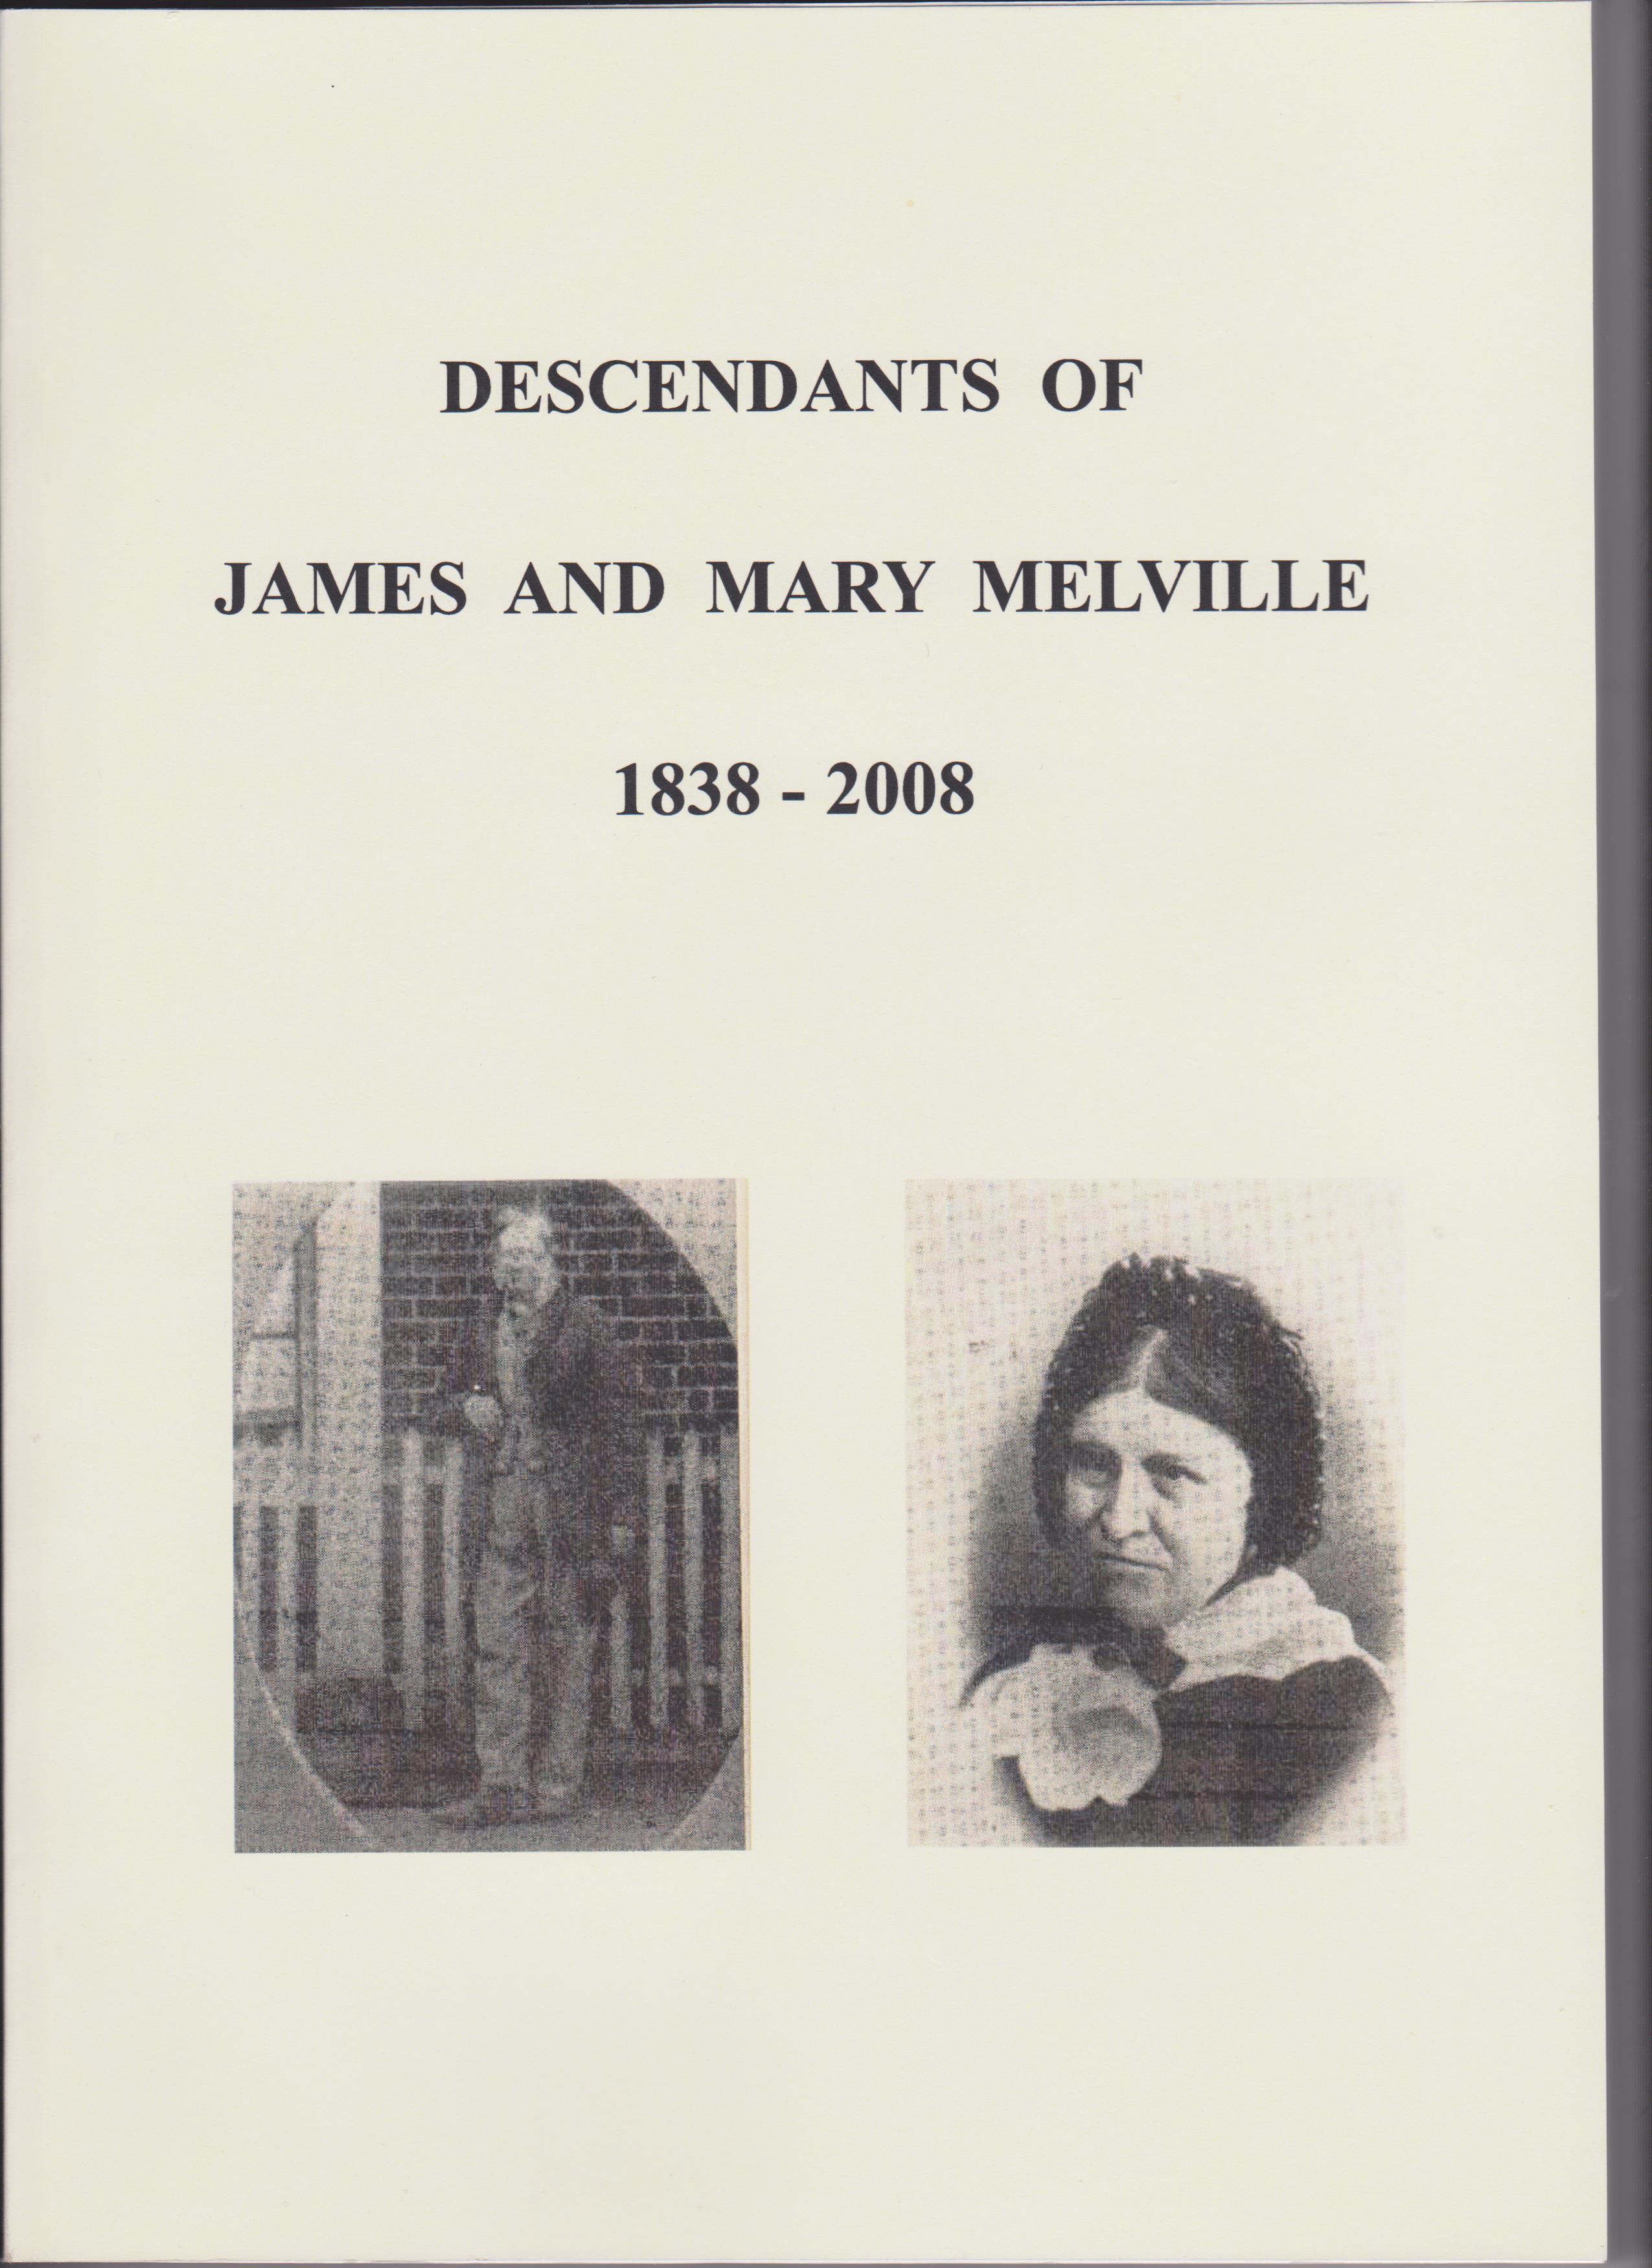 Descendants of James and Mary Melville - 1838 - 2008